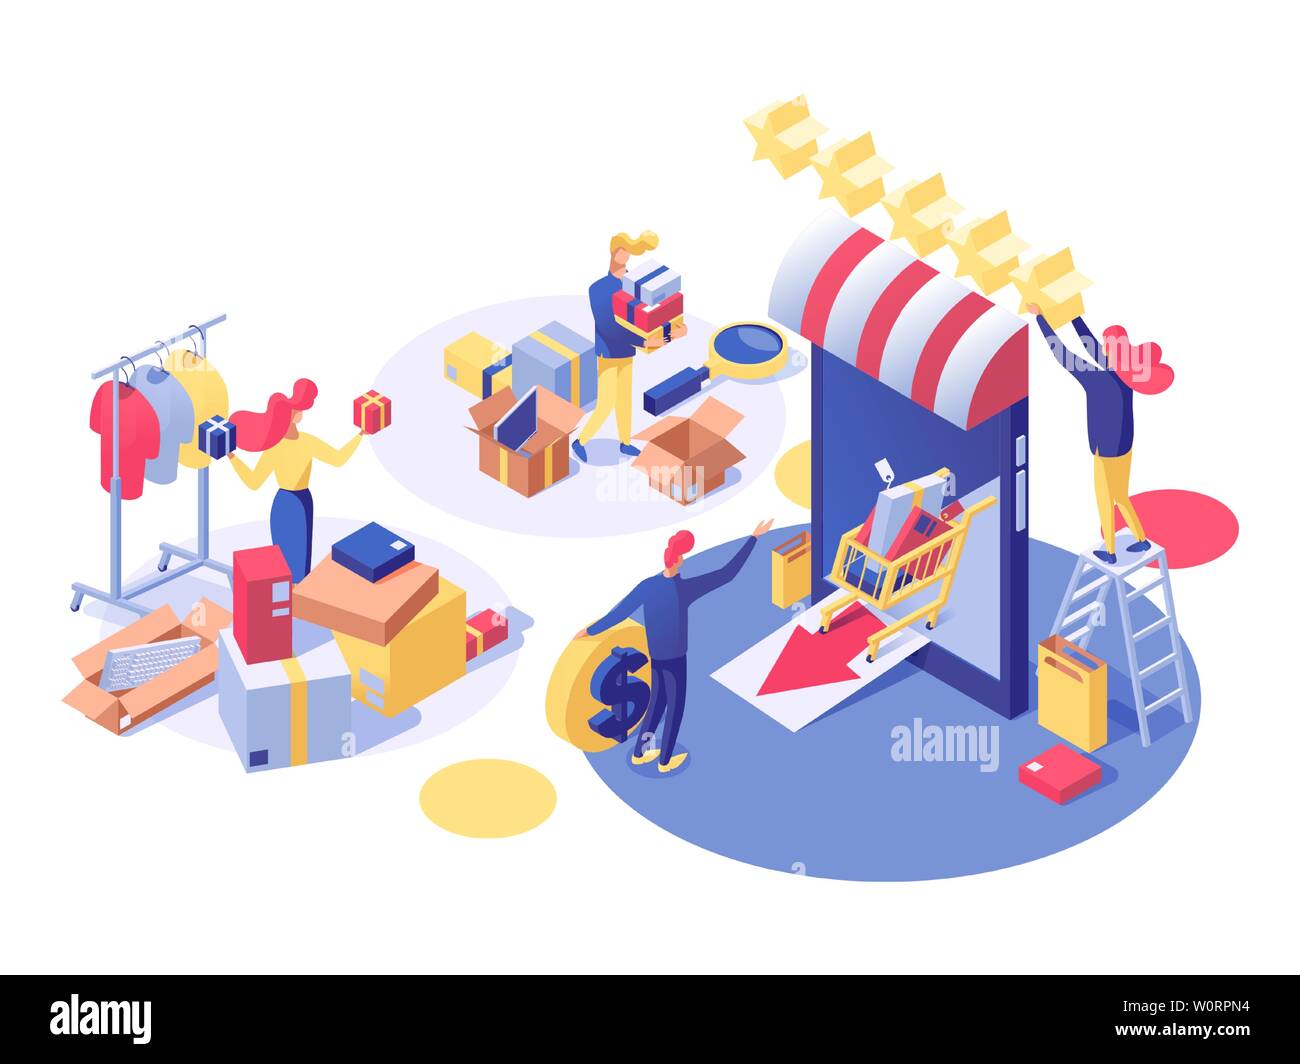 E-commerce and shopping vector isometric illustration. Shop assistant doing inventory, entrepreneur opening store and buying products for sale 3d characters. Consumerism, trading and retail business Stock Vector